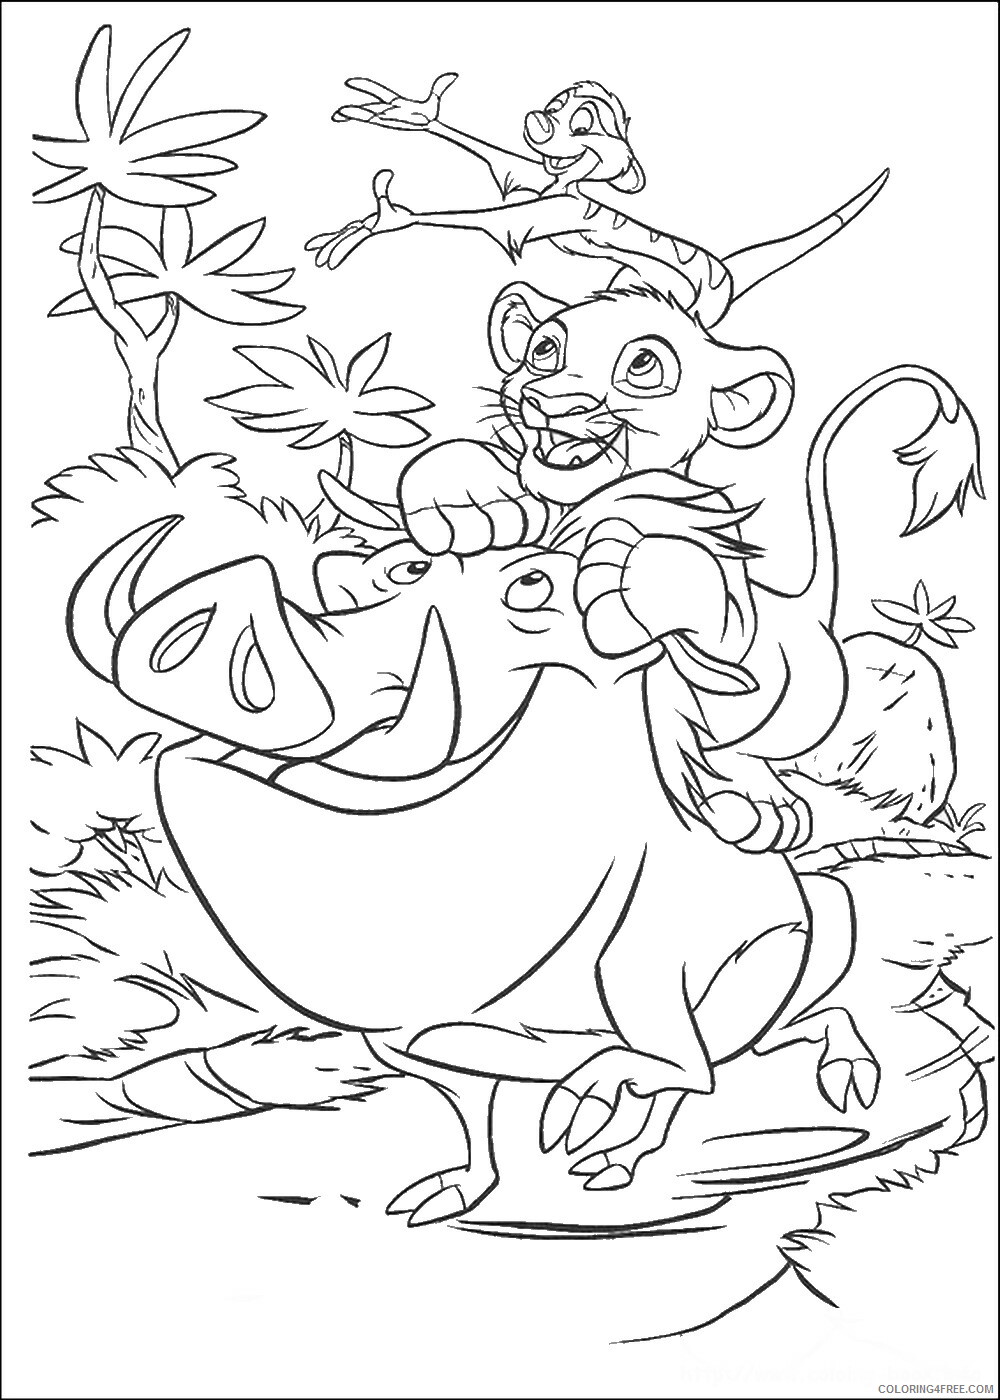 The Lion King Coloring Pages TV Film lionking_78 Printable 2020 09194 Coloring4free